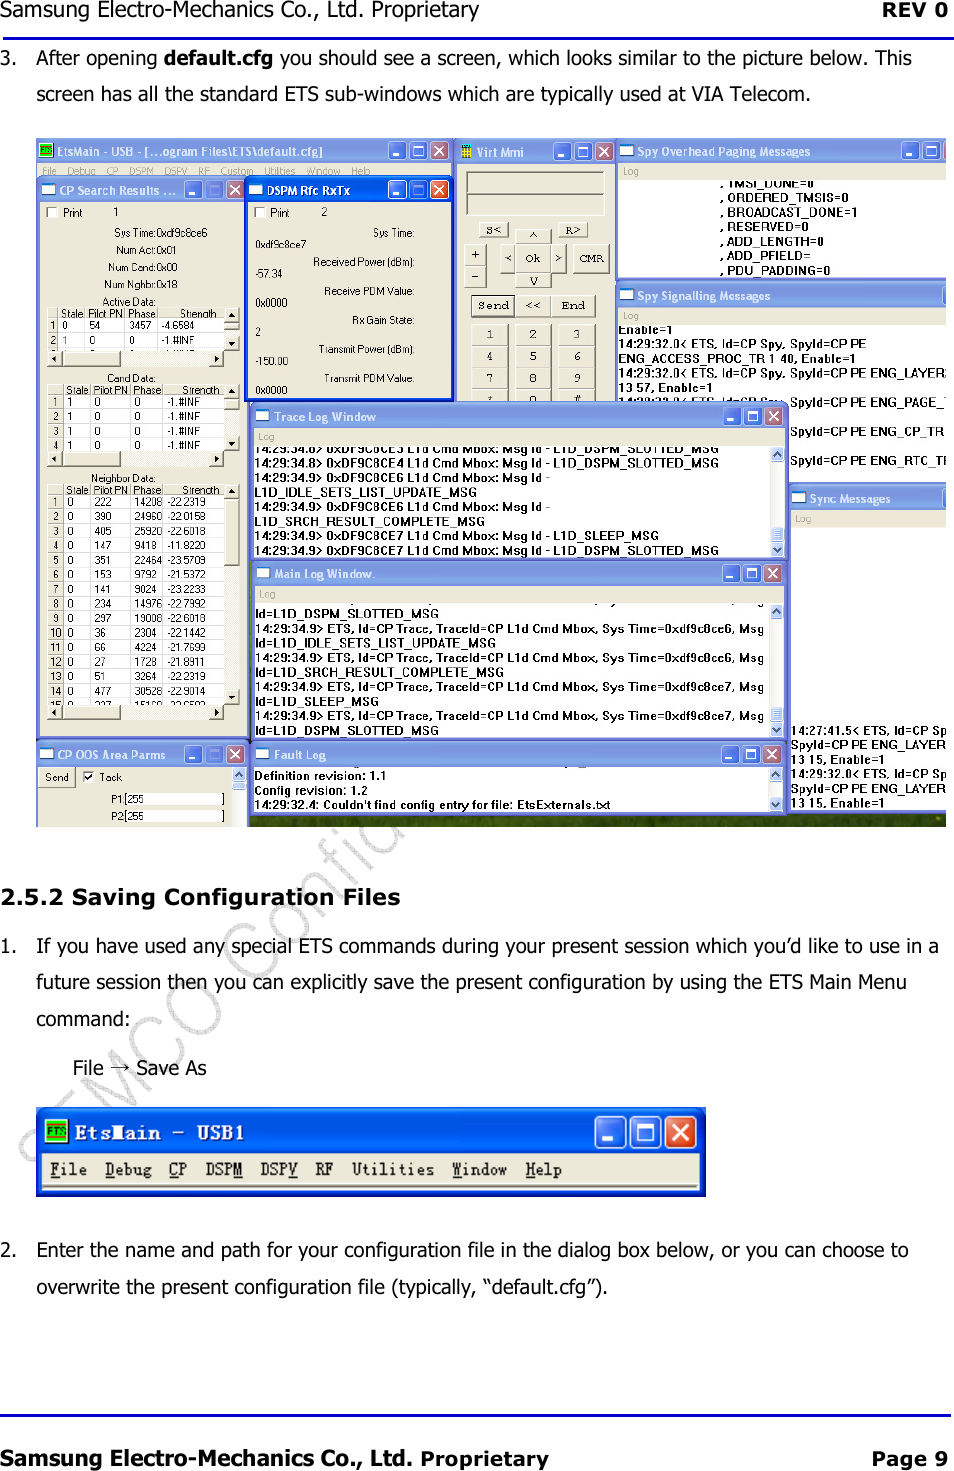 Samsung Electro-Mechanics Co., Ltd. Proprietary  REV 0 Samsung Electro-Mechanics Co., Ltd. Proprietary  Page 9 3. After opening default.cfg you should see a screen, which looks similar to the picture below. This screen has all the standard ETS sub-windows which are typically used at VIA Telecom.  2.5.2  Saving Configuration Files 1. If you have used any special ETS commands during your present session which you’d like to use in a future session then you can explicitly save the present configuration by using the ETS Main Menu command: File   Save As  2. Enter the name and path for your configuration file in the dialog box below, or you can choose to overwrite the present configuration file (typically, “default.cfg”). 